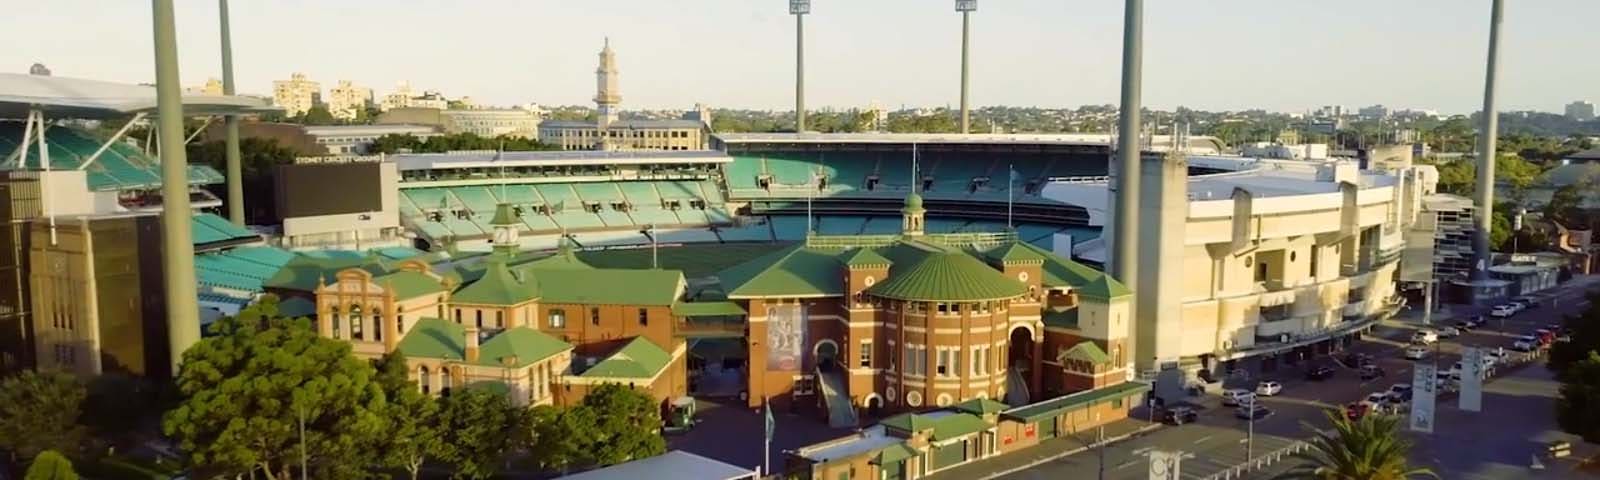 Sports, Media, and Entertainment Sydney Cricket Ground video